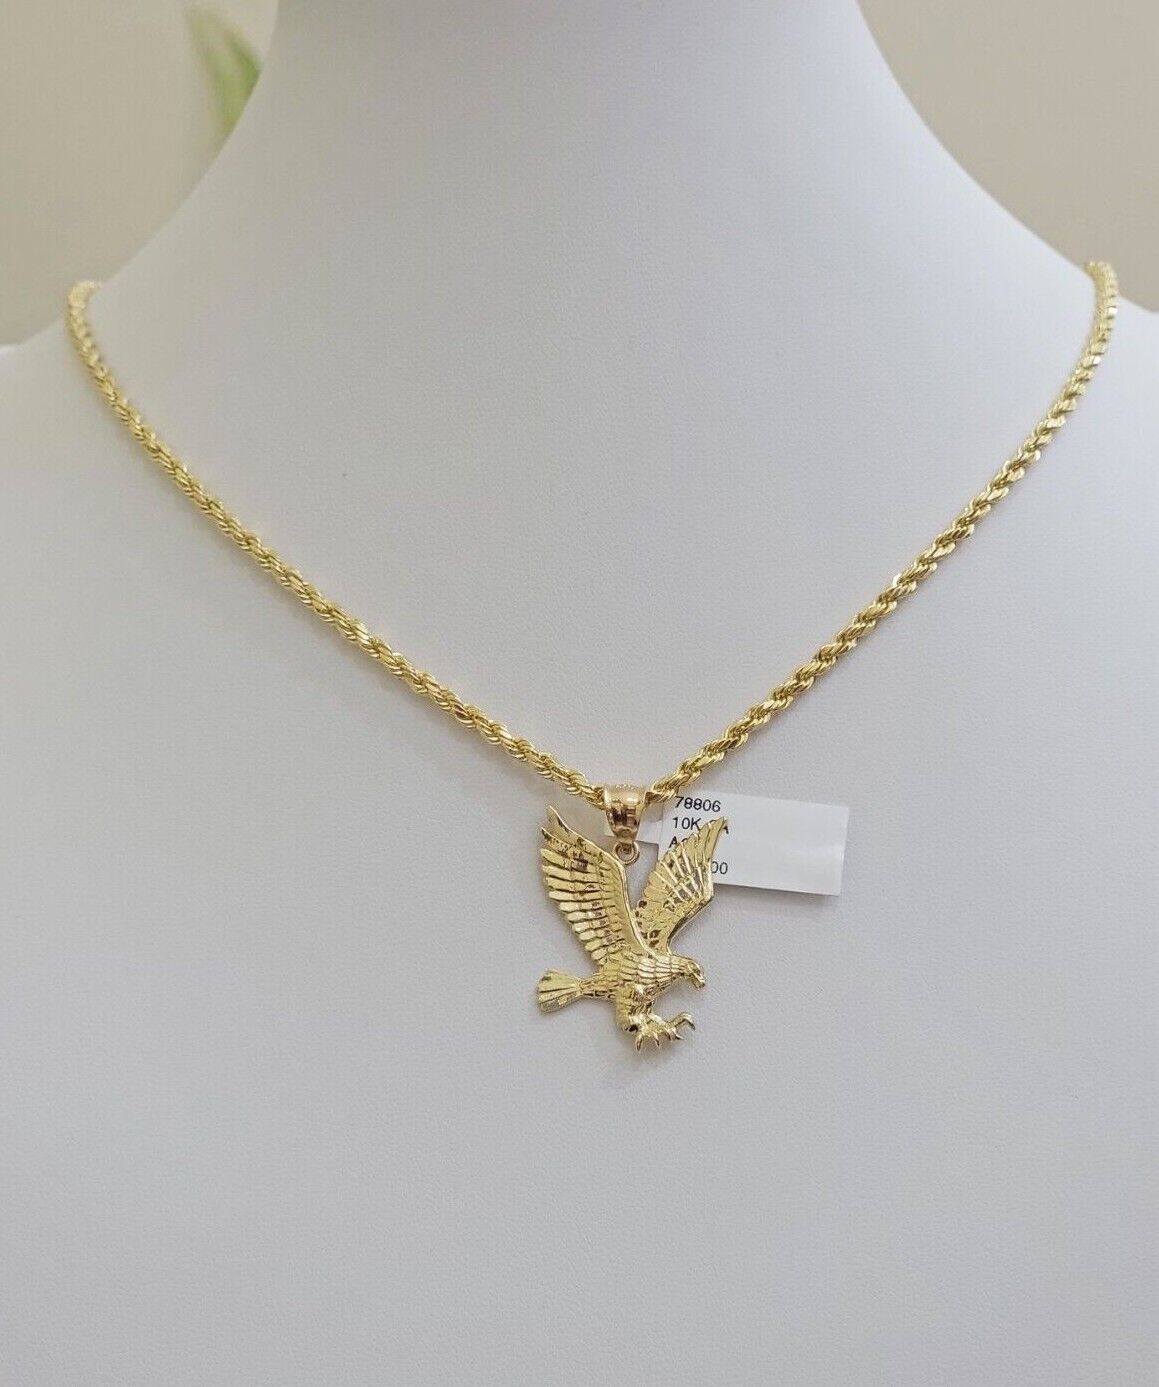 10k Gold Rope Chain Eagle Charm Pendant Set 22'' Inches 3mm Necklace REAL SALE